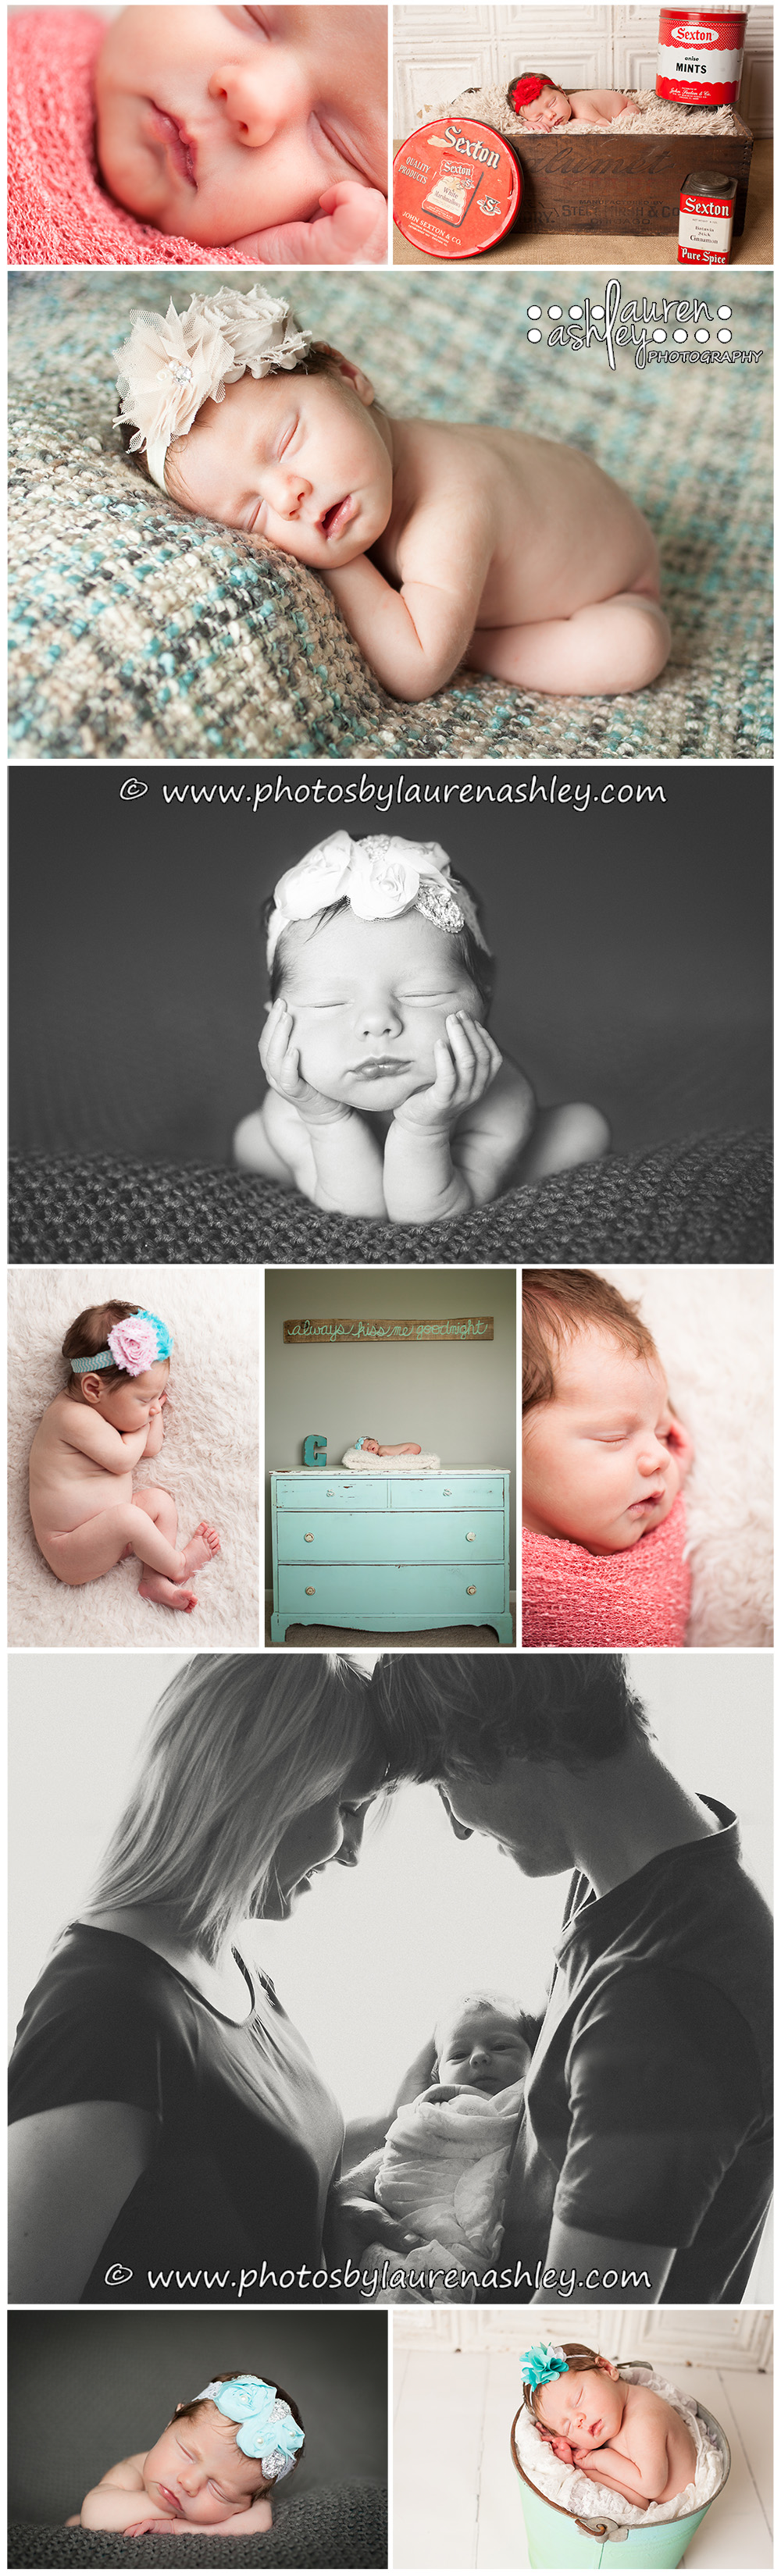 Newborn Photography Poses from Lauren Ashley Photography in Cedar Rapids, IA